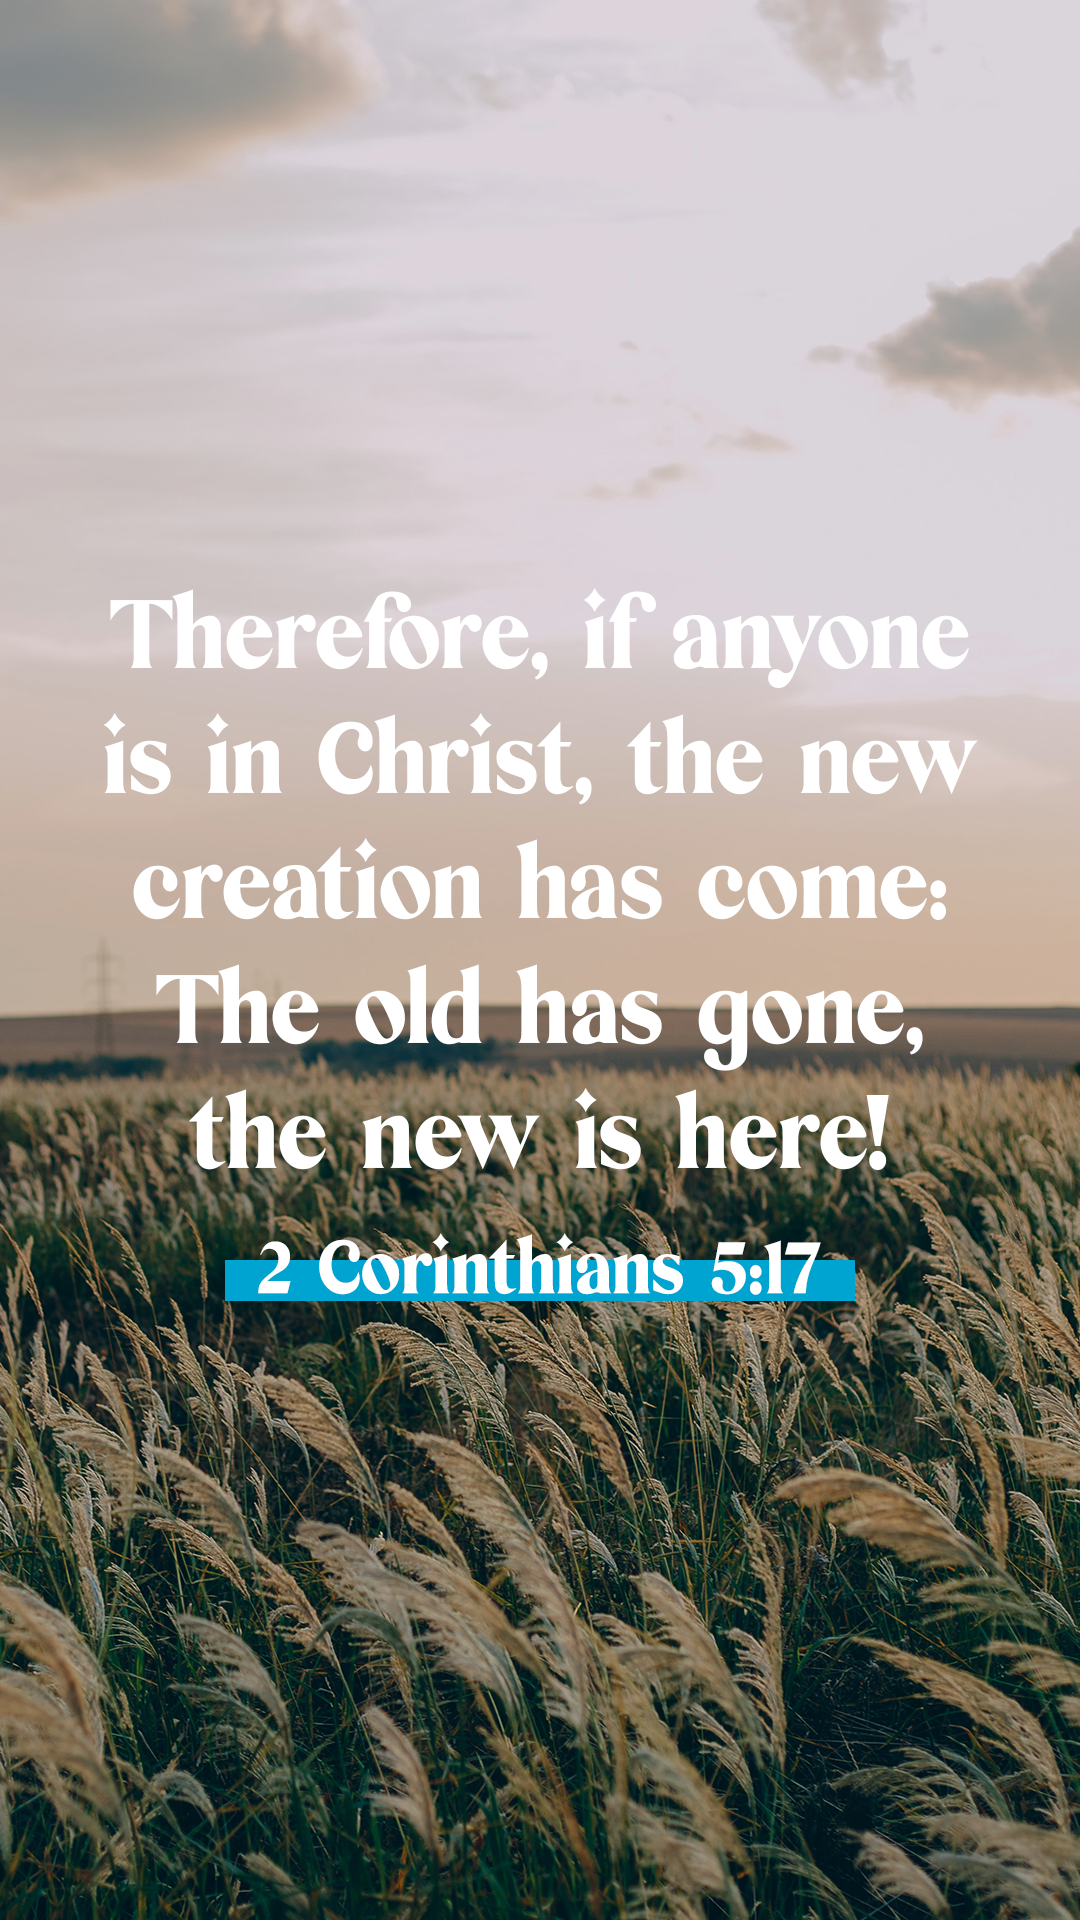 The New Creation Has Come  2 Corinthians 517  Bible Verses and Scripture  Wallpaper for Phone or Computer